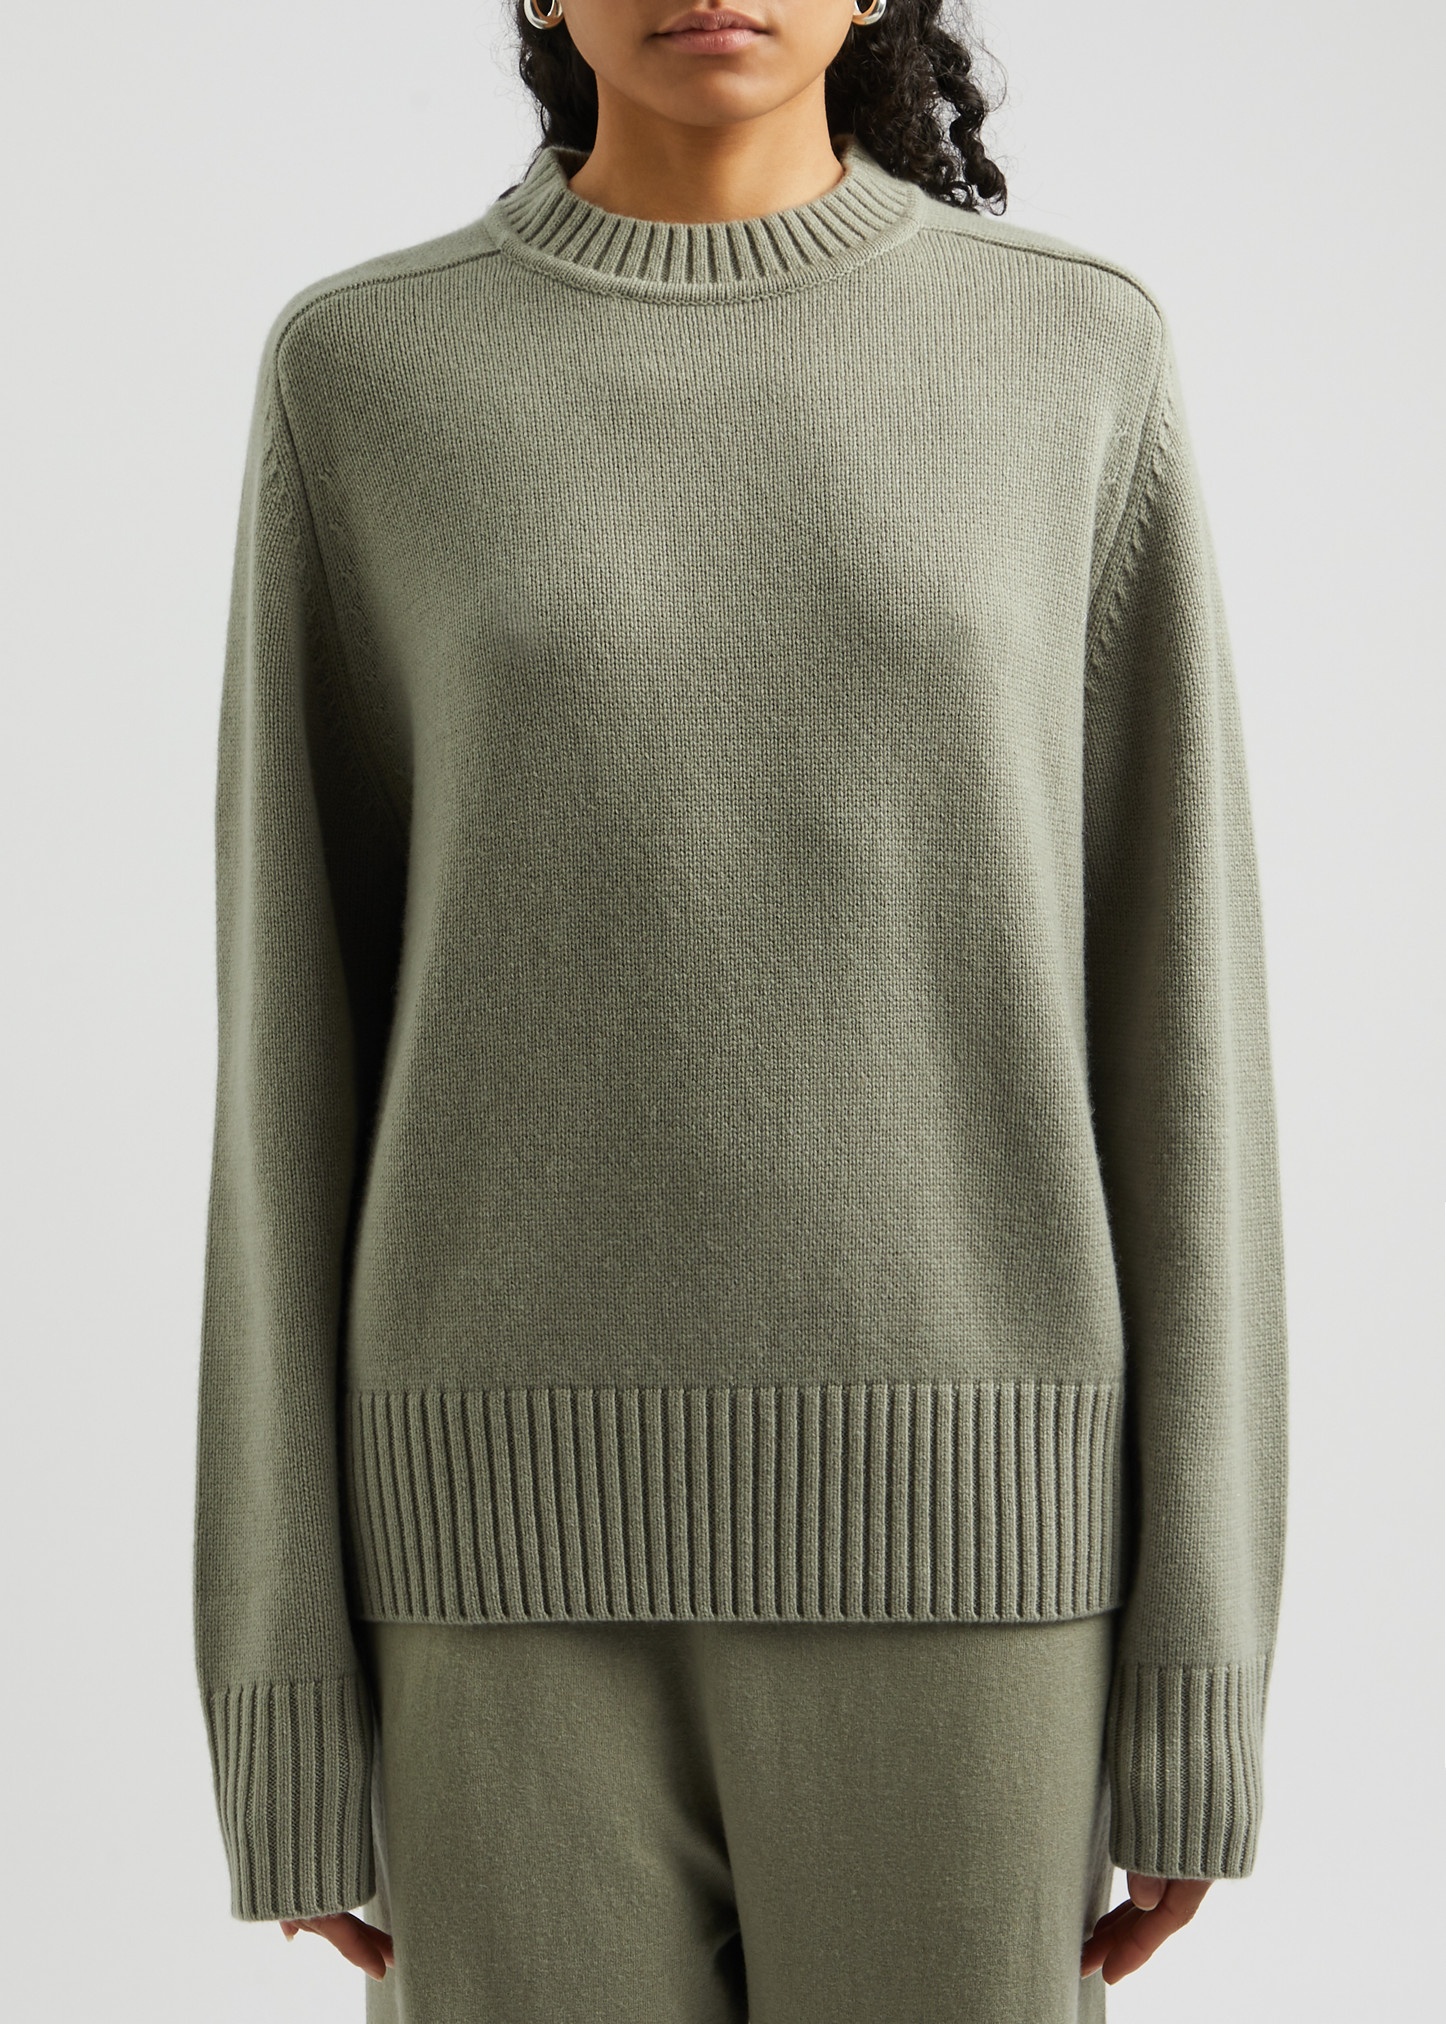 N°123 Bourgeois cashmere jumper - 2